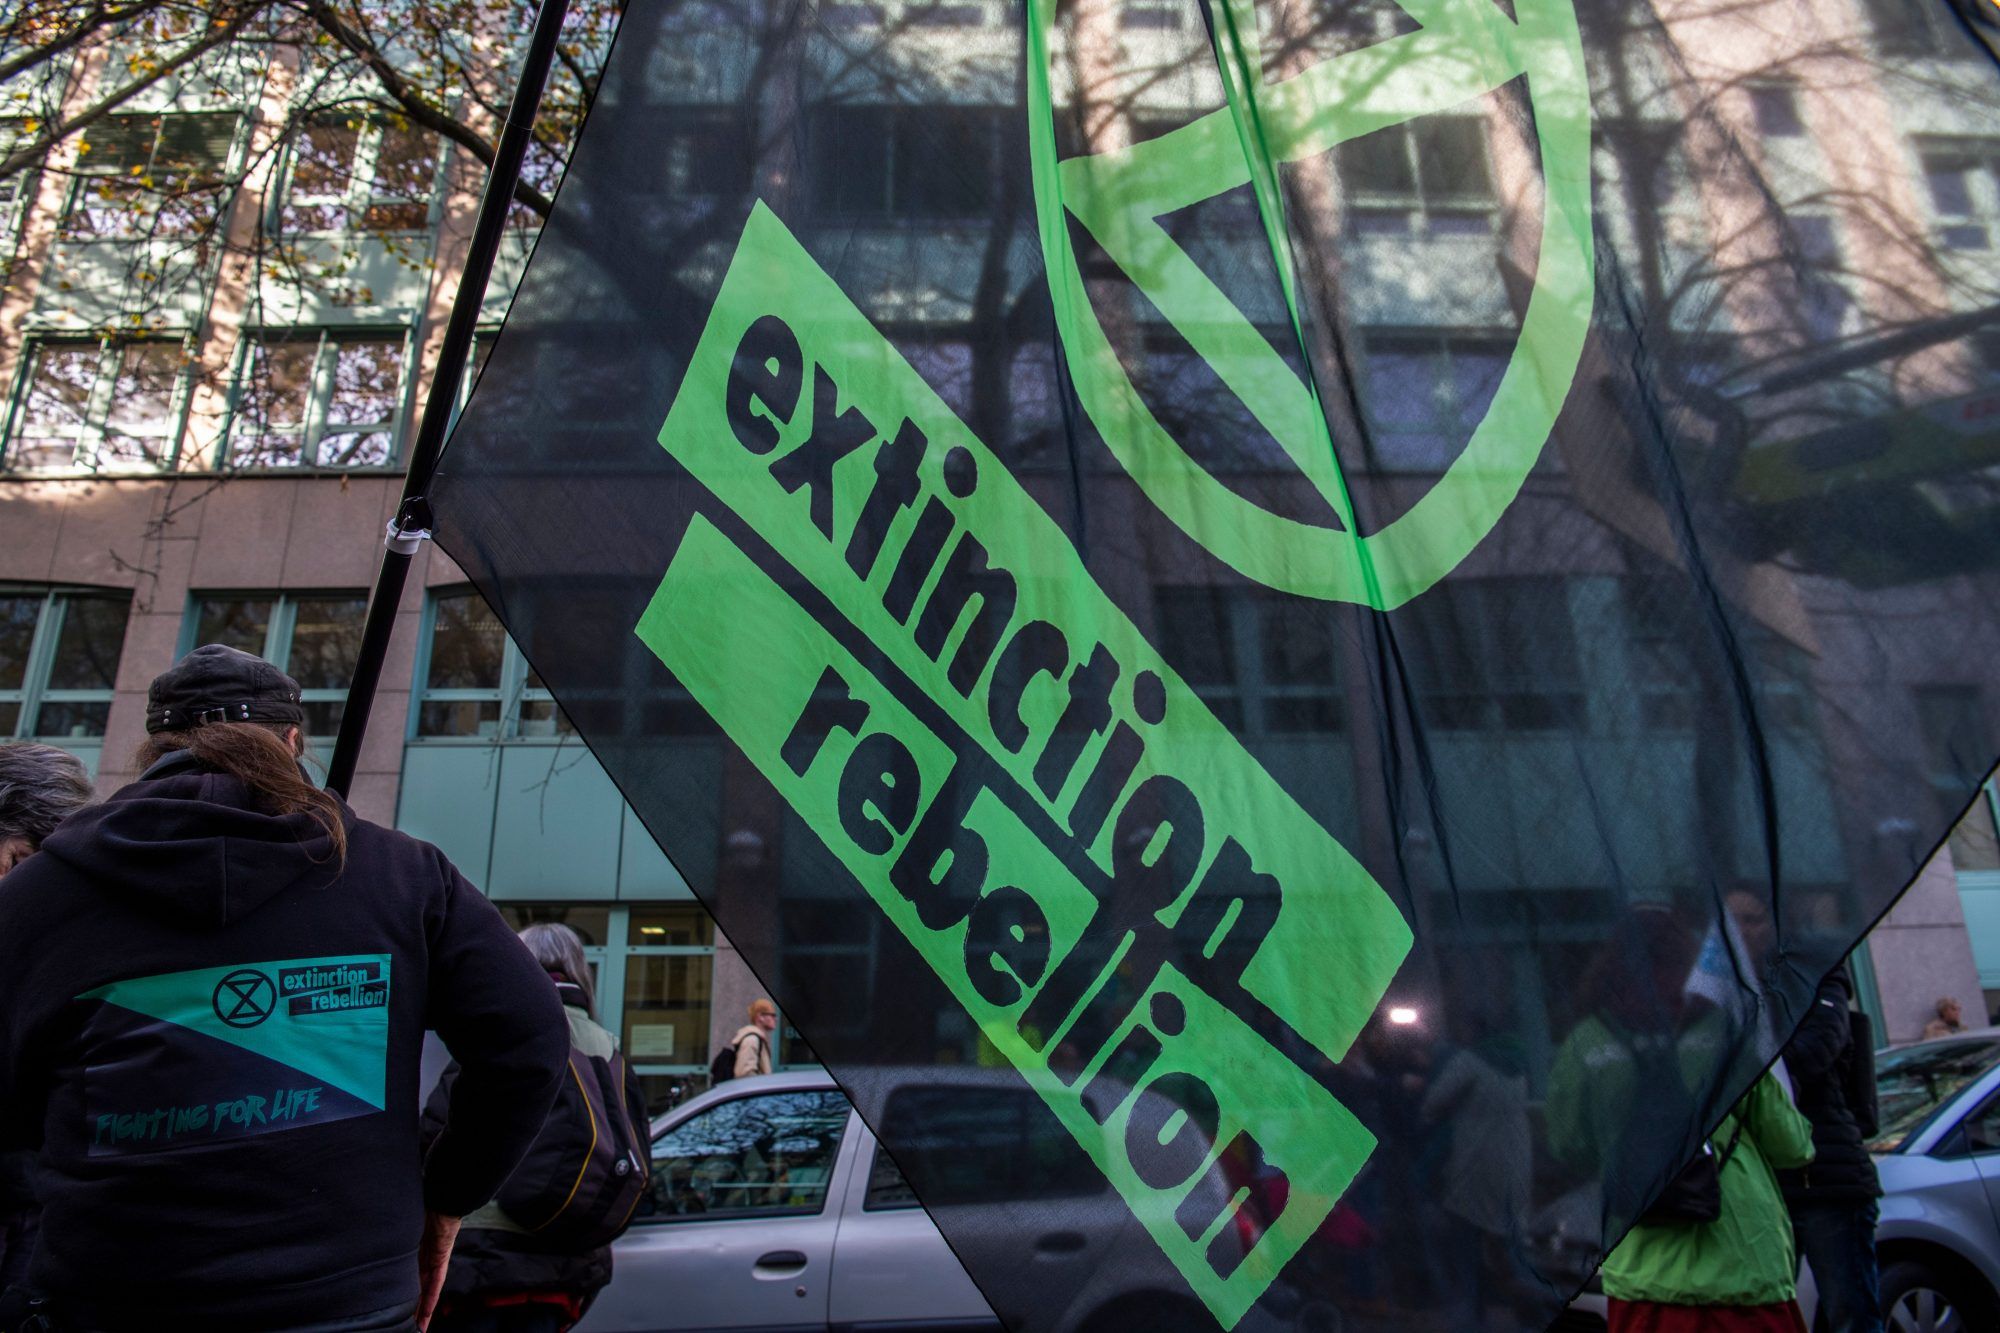 Police ban on Extinction Rebellion protests ruled unlawful